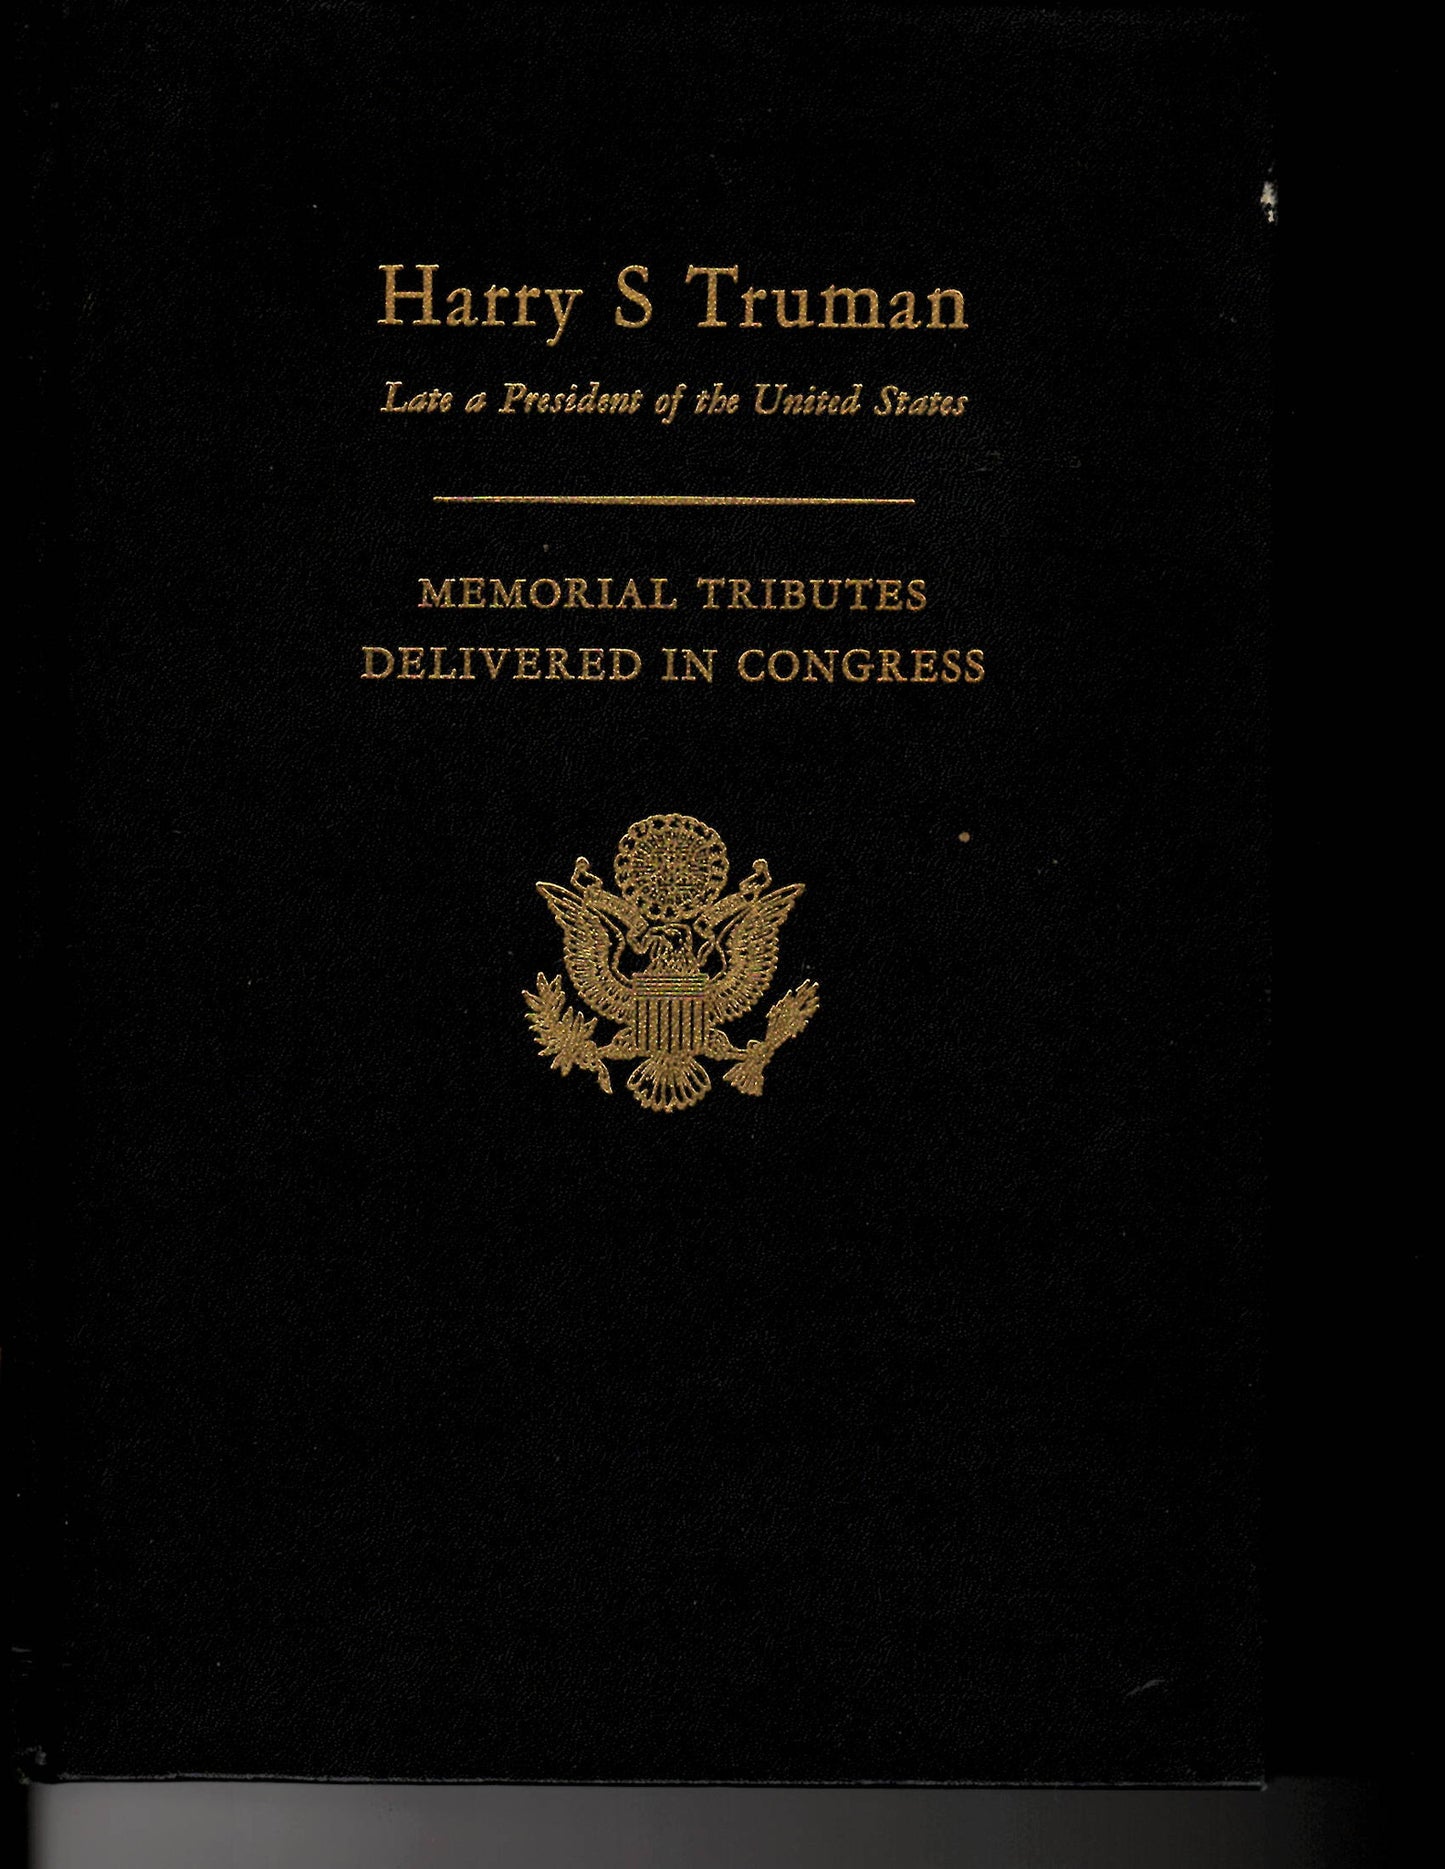 12 05 1973 Harold S. Truman Memorial Tributes and signed letter